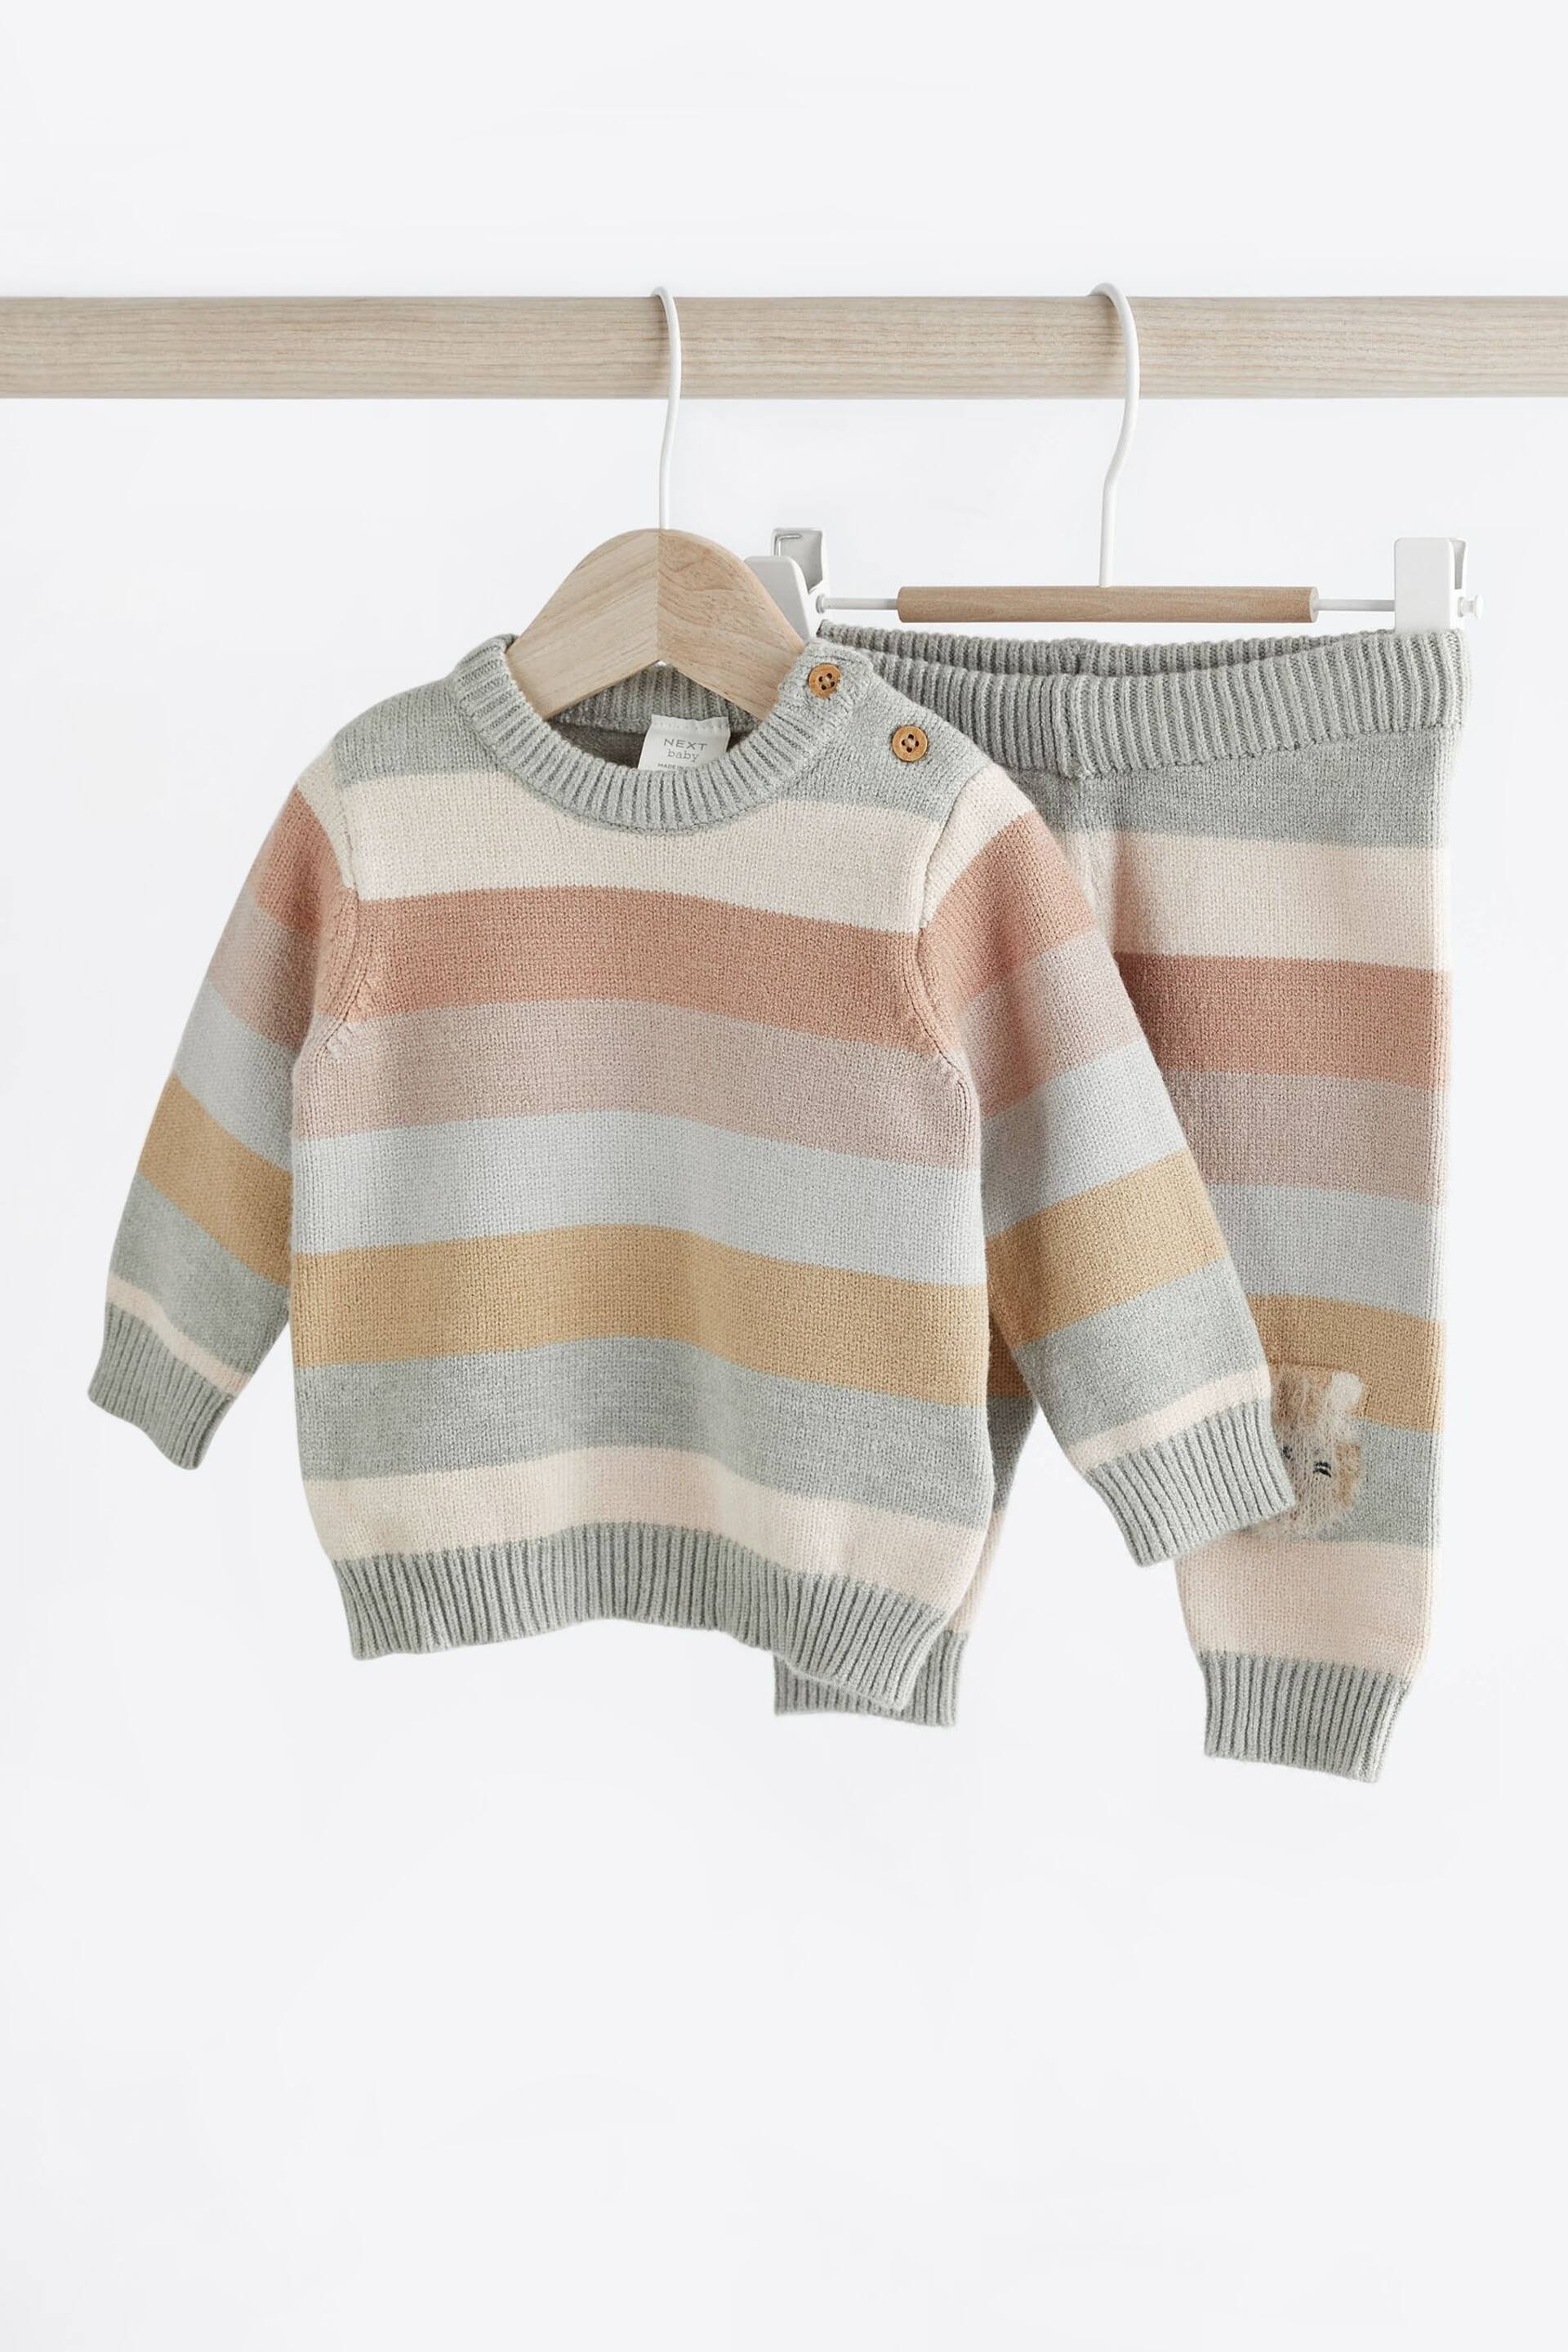 Tan/Blue Tiger Stripe Baby Knitted Jumper & Leggings 2 Piece Set (0mths-2yrs) - Image 5 of 12